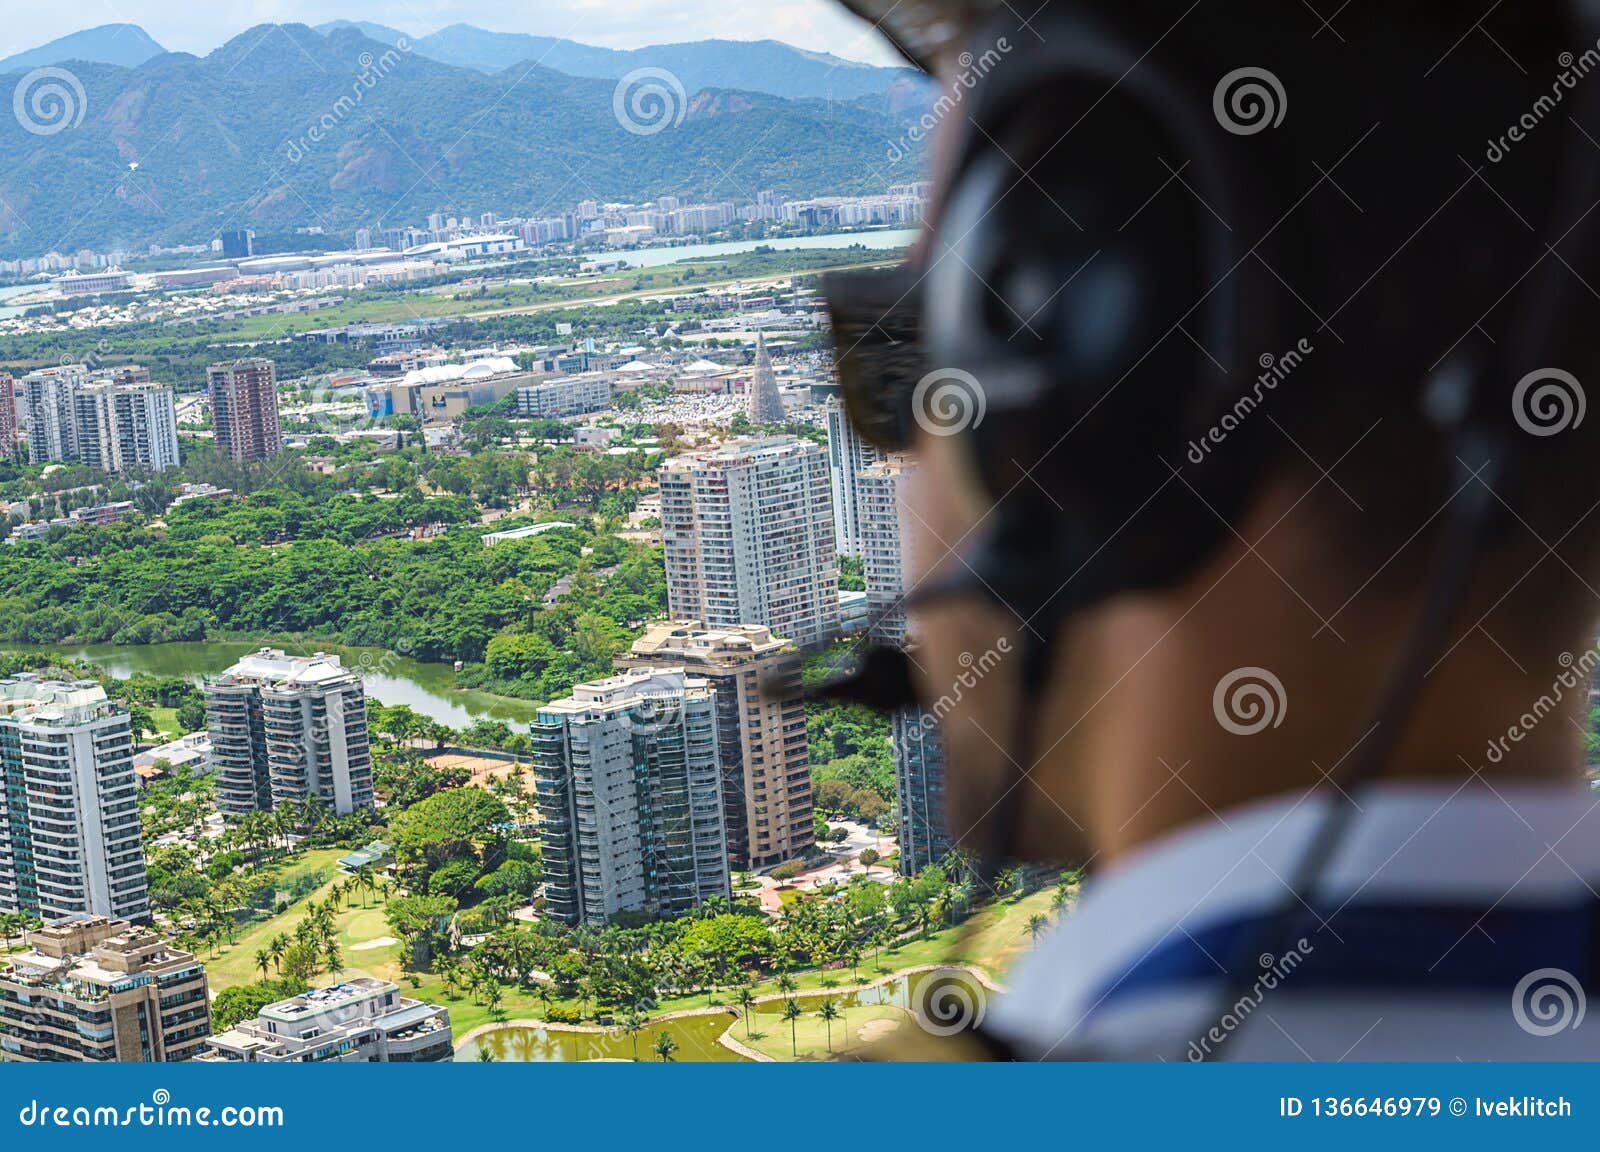 view from a helicopter cockpit flying over rio de janeiro. cockpit with pilot and control board inside the cabin in a sunny day.